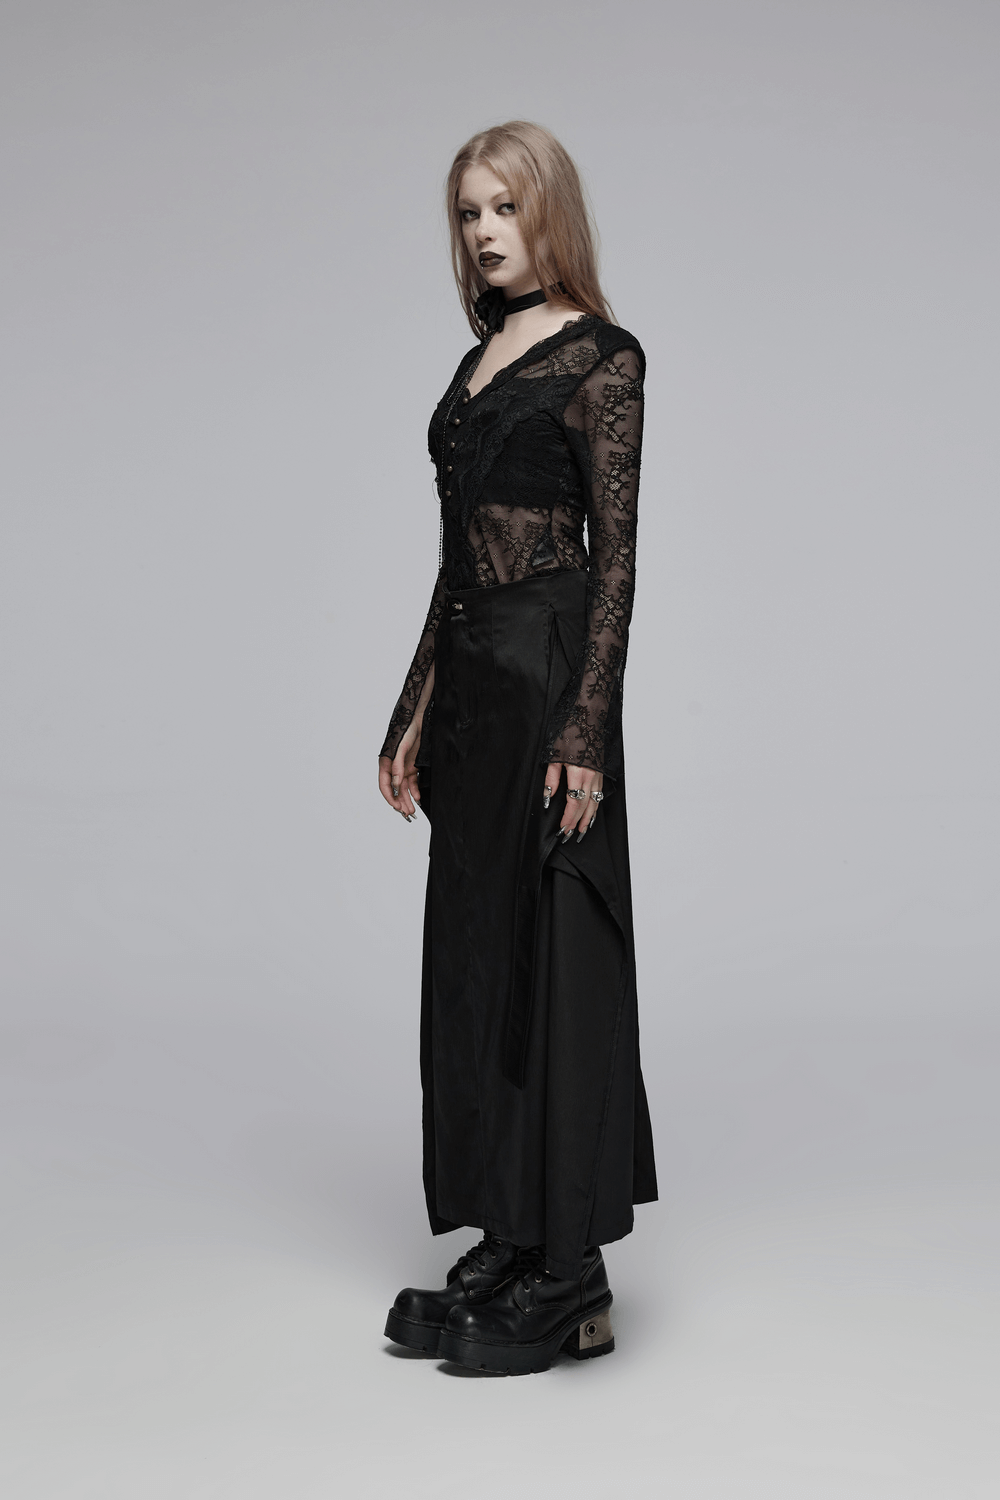 Victorian-Inspired Black A-Line Maxi Skirt with Pockets